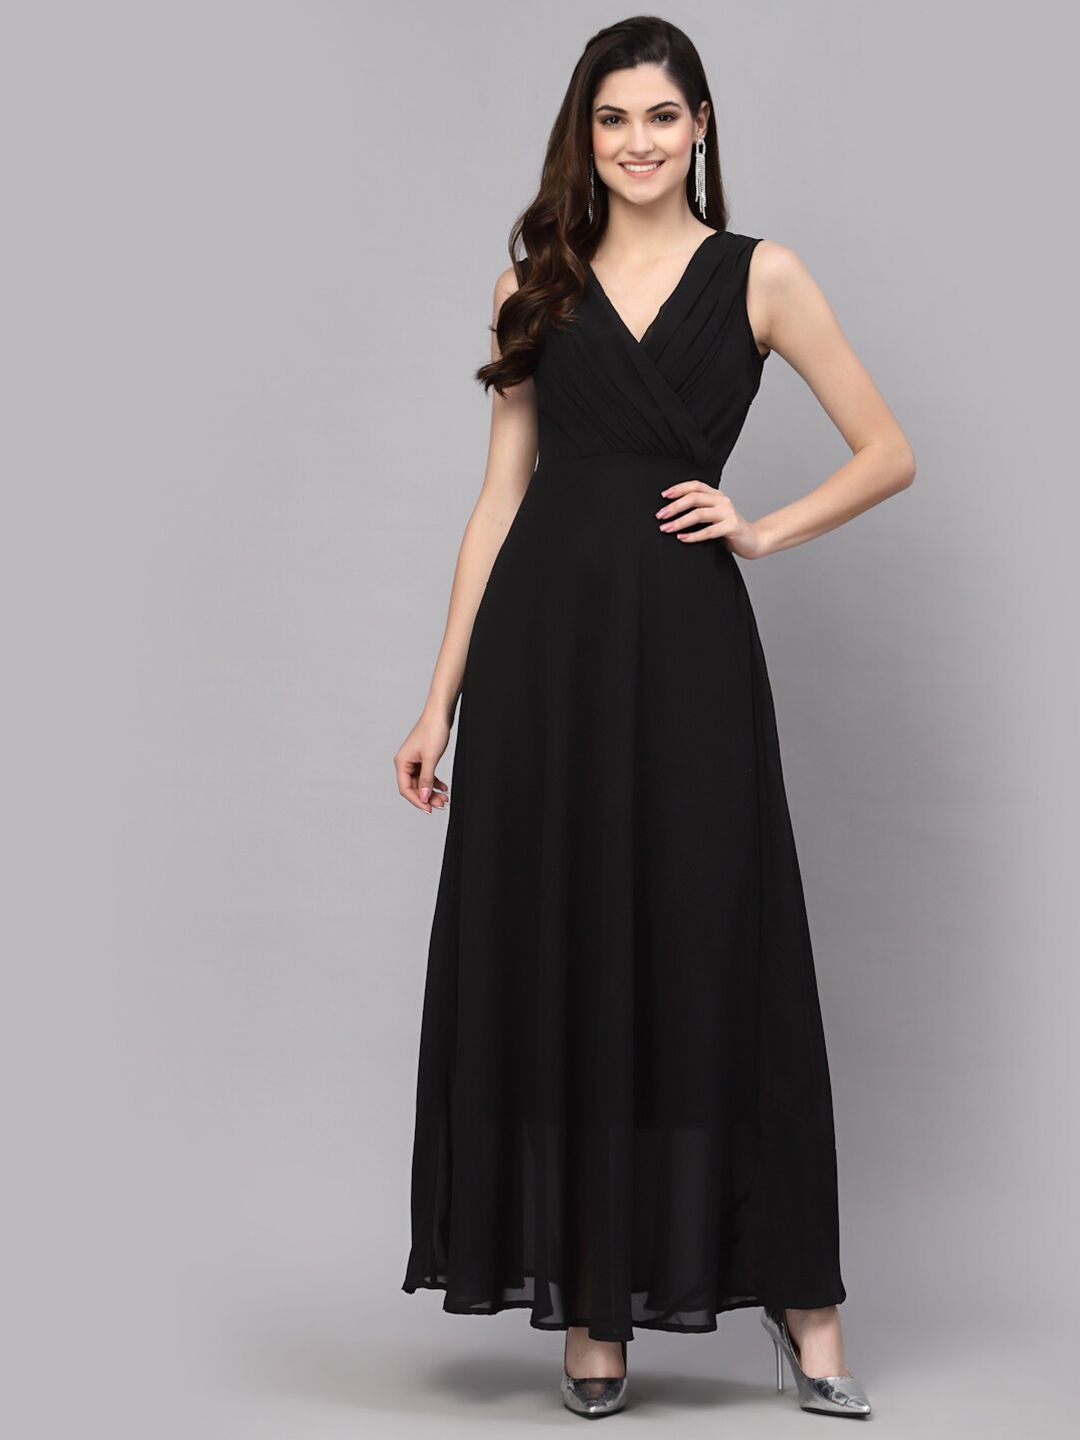 aayu V Neck Sleeveless Georgette Maxi Dress Price in India